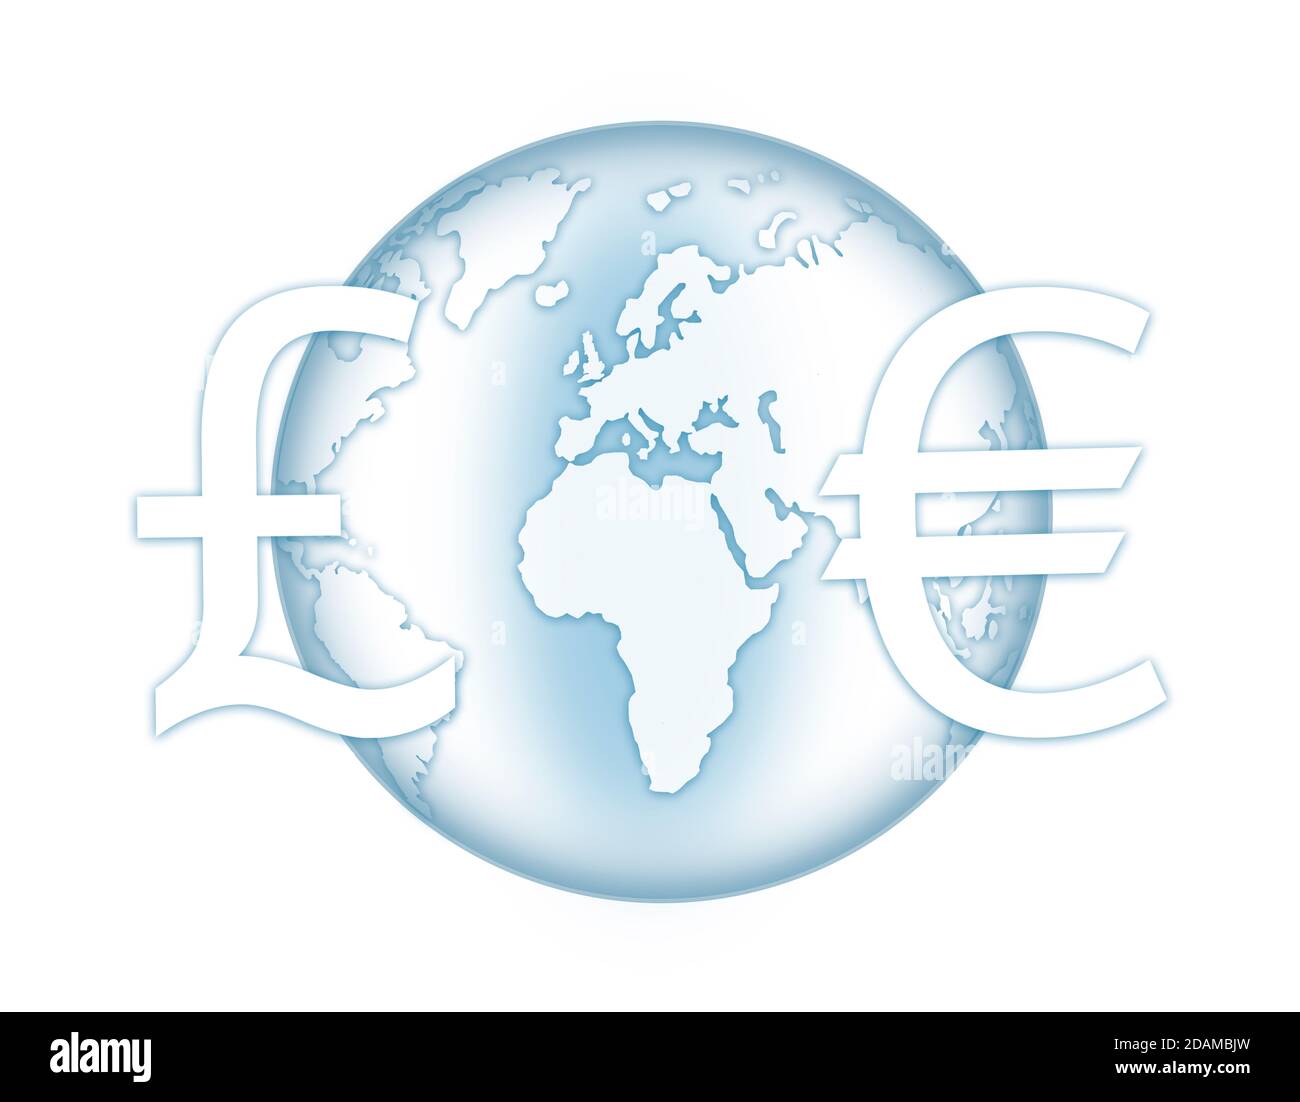 Earth with pound and euro currency symbols, illustration. Stock Photo